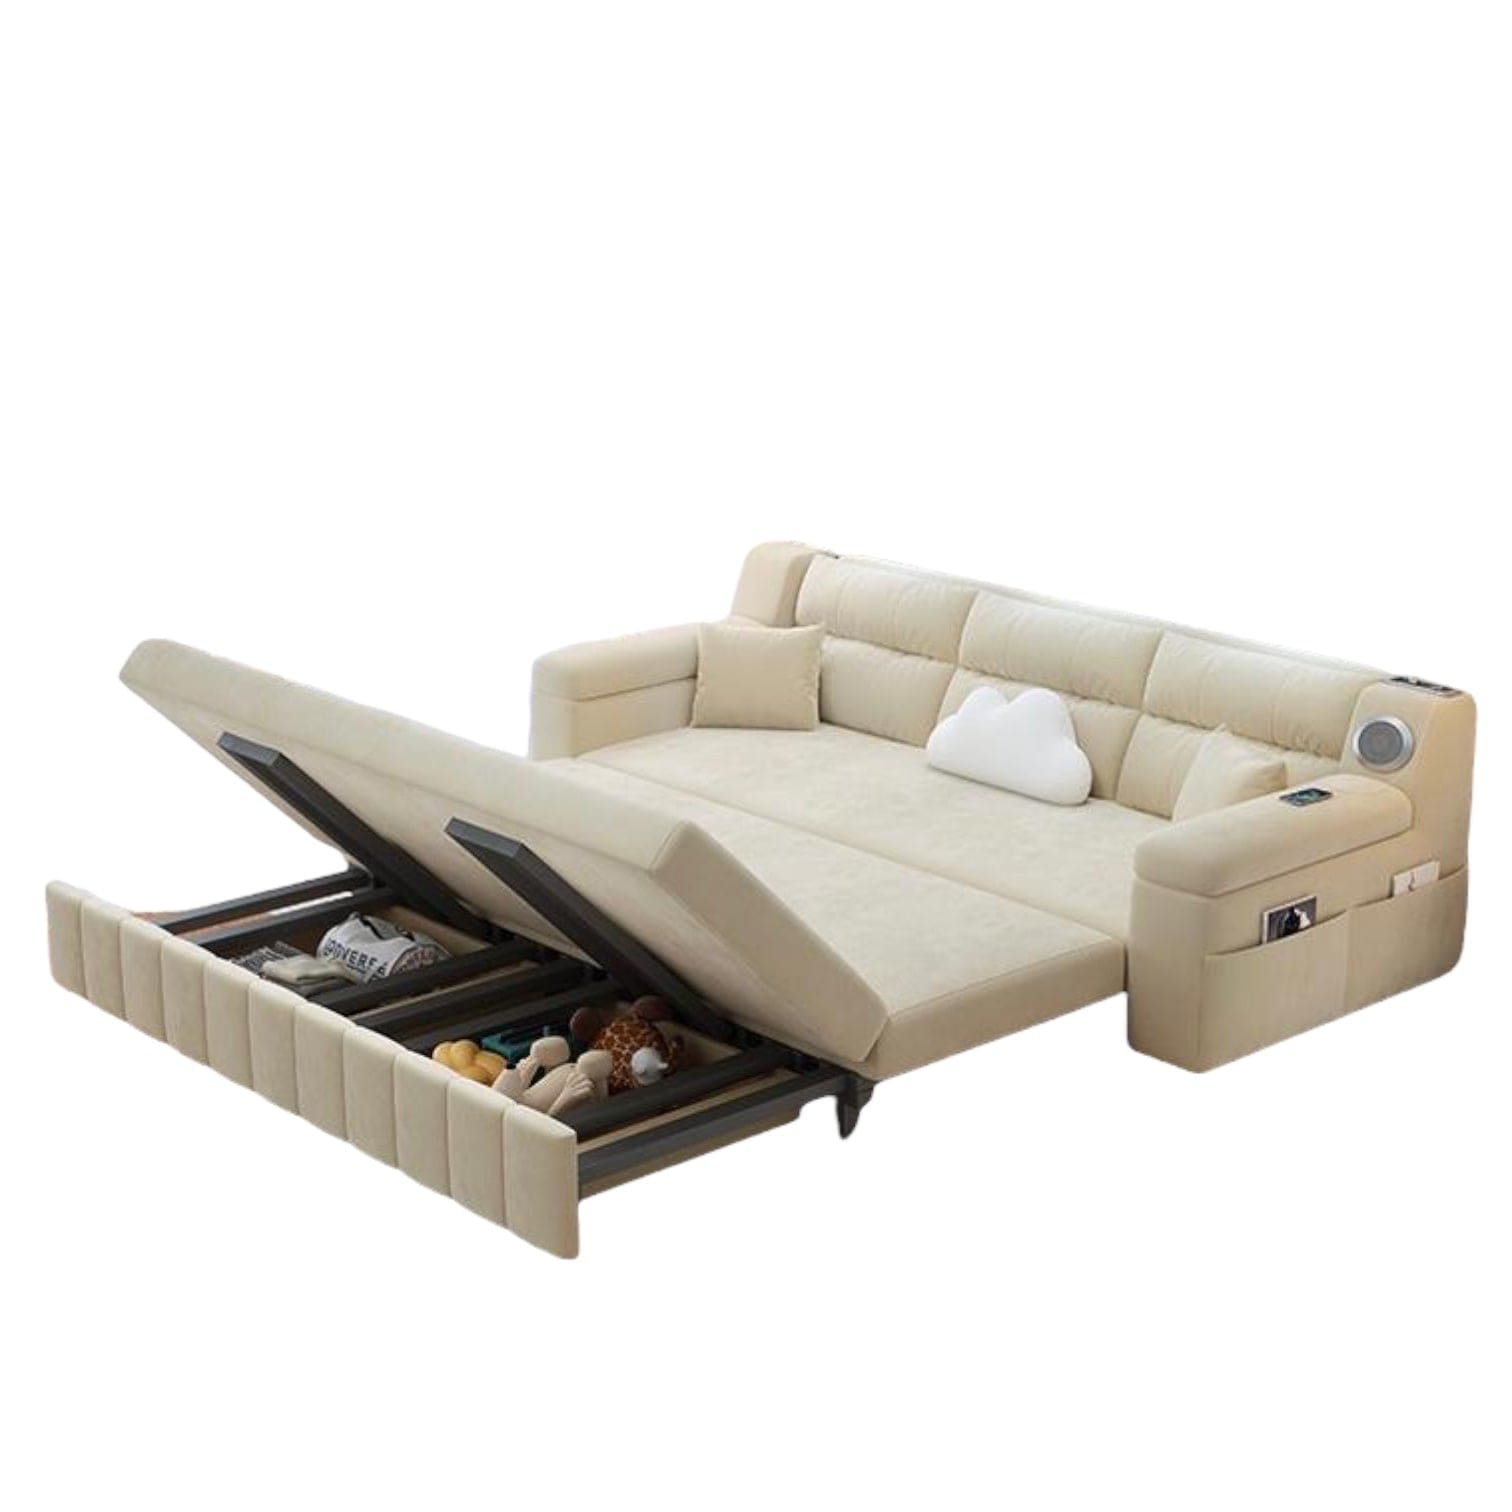 Home Atelier Riley Pull-out Storage Sofa Bed